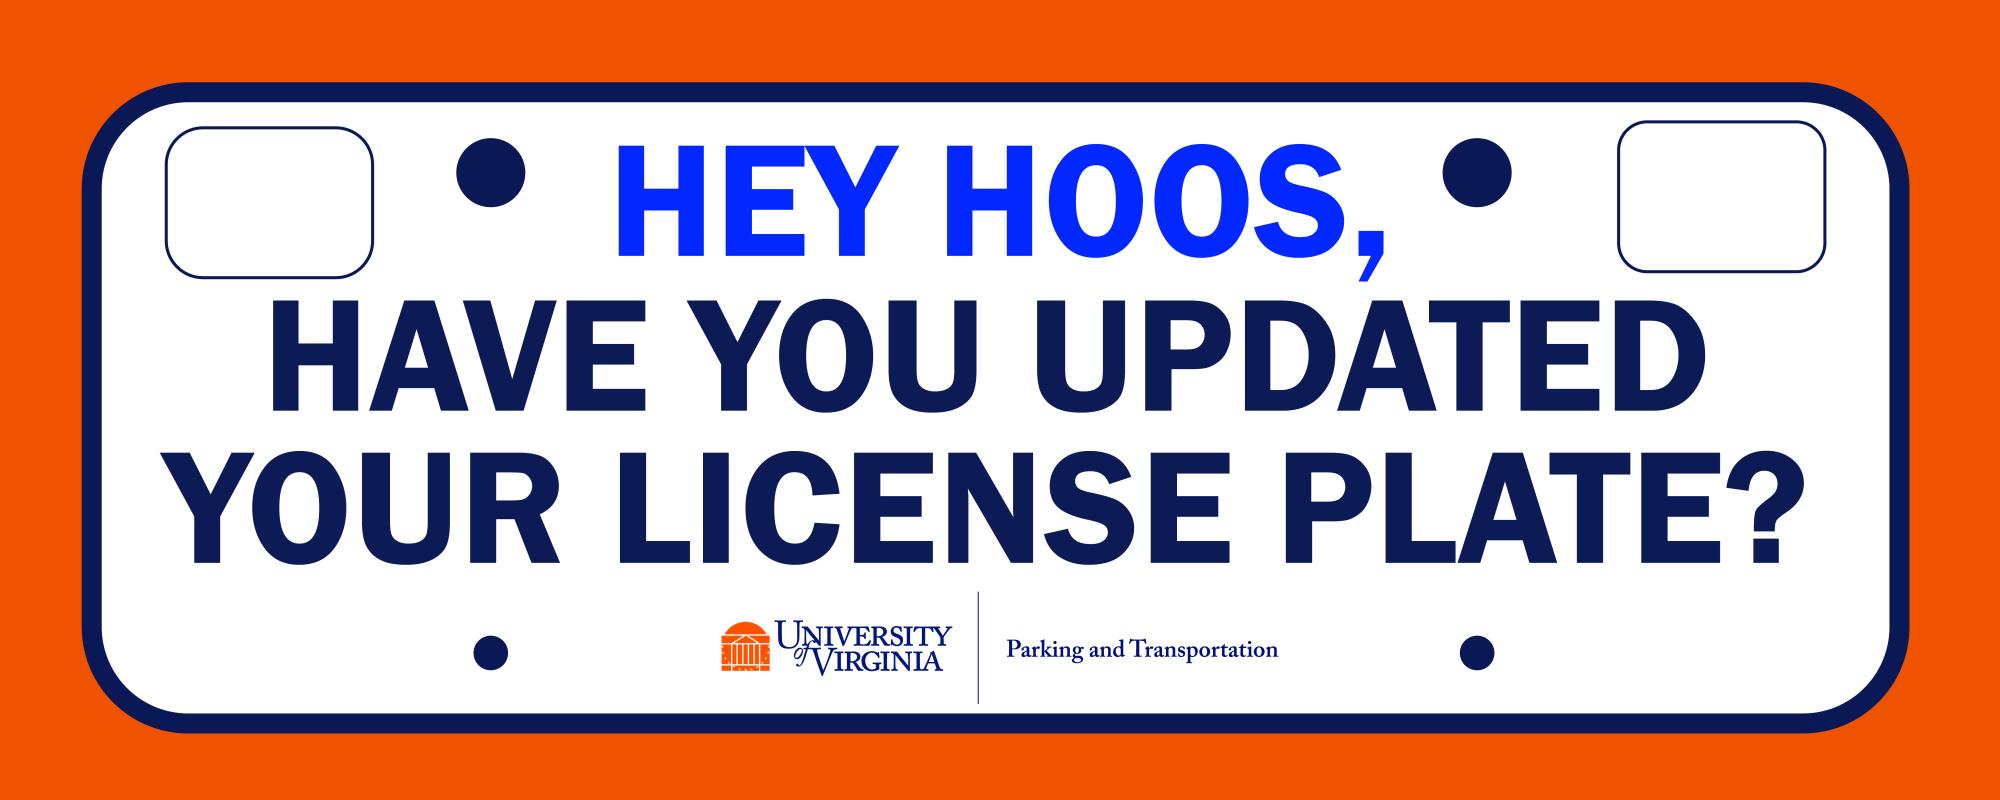 "Hey Hoos, have you updated your license plate?" 